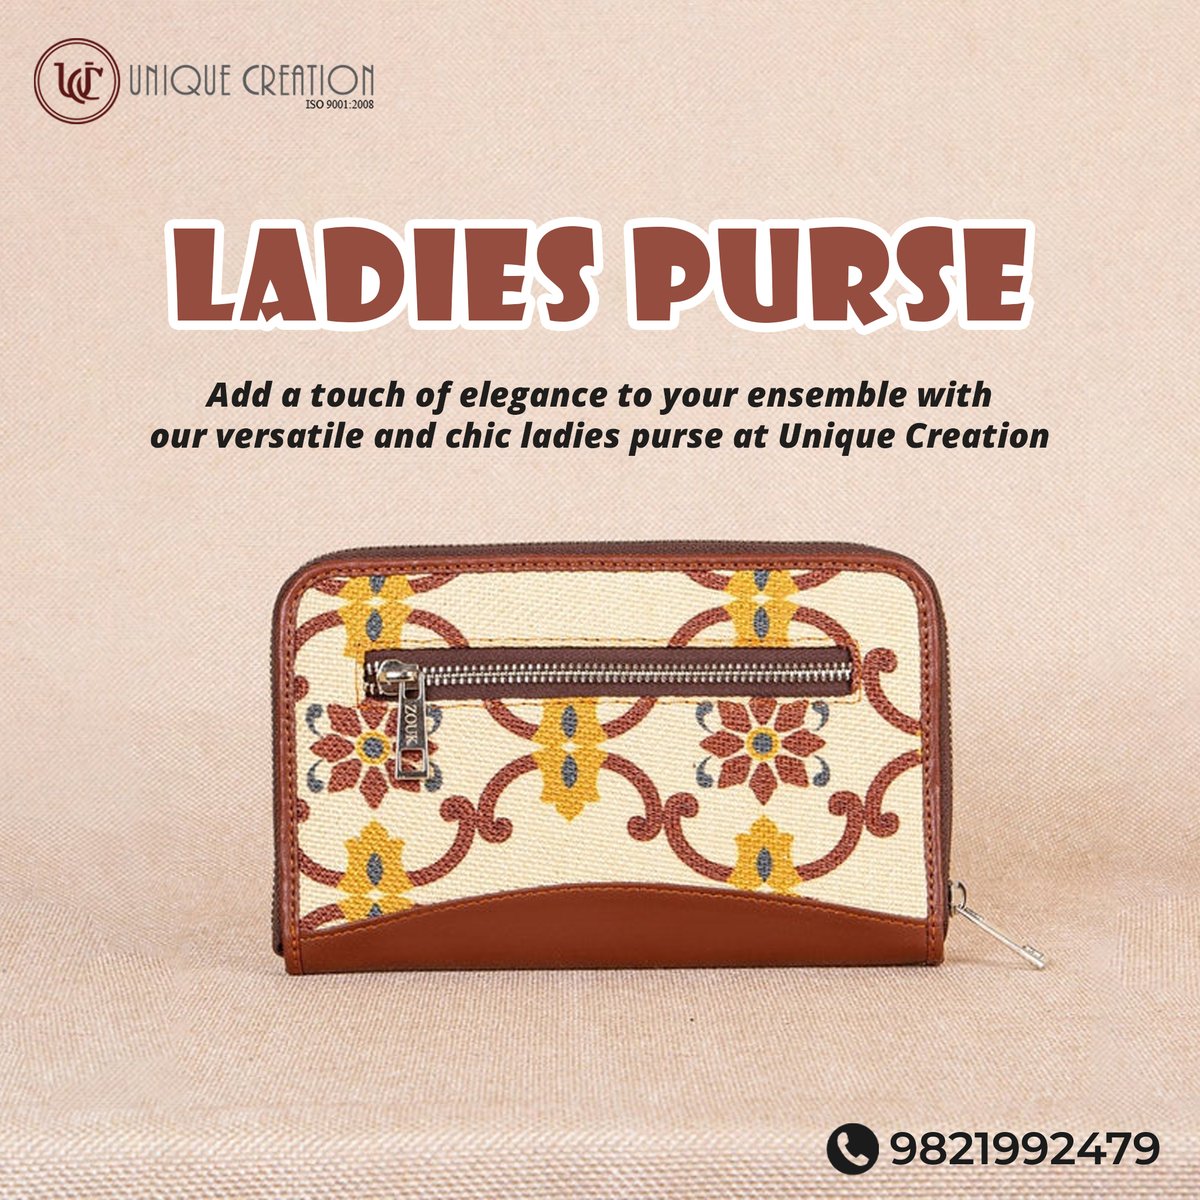 Make a style statement with our sophisticated and practical #ladiespurse, perfect for any occasion. Shop from us now.
Call us at 9821992479 for #wholesale queries.
#manufacturer #supplier #trader